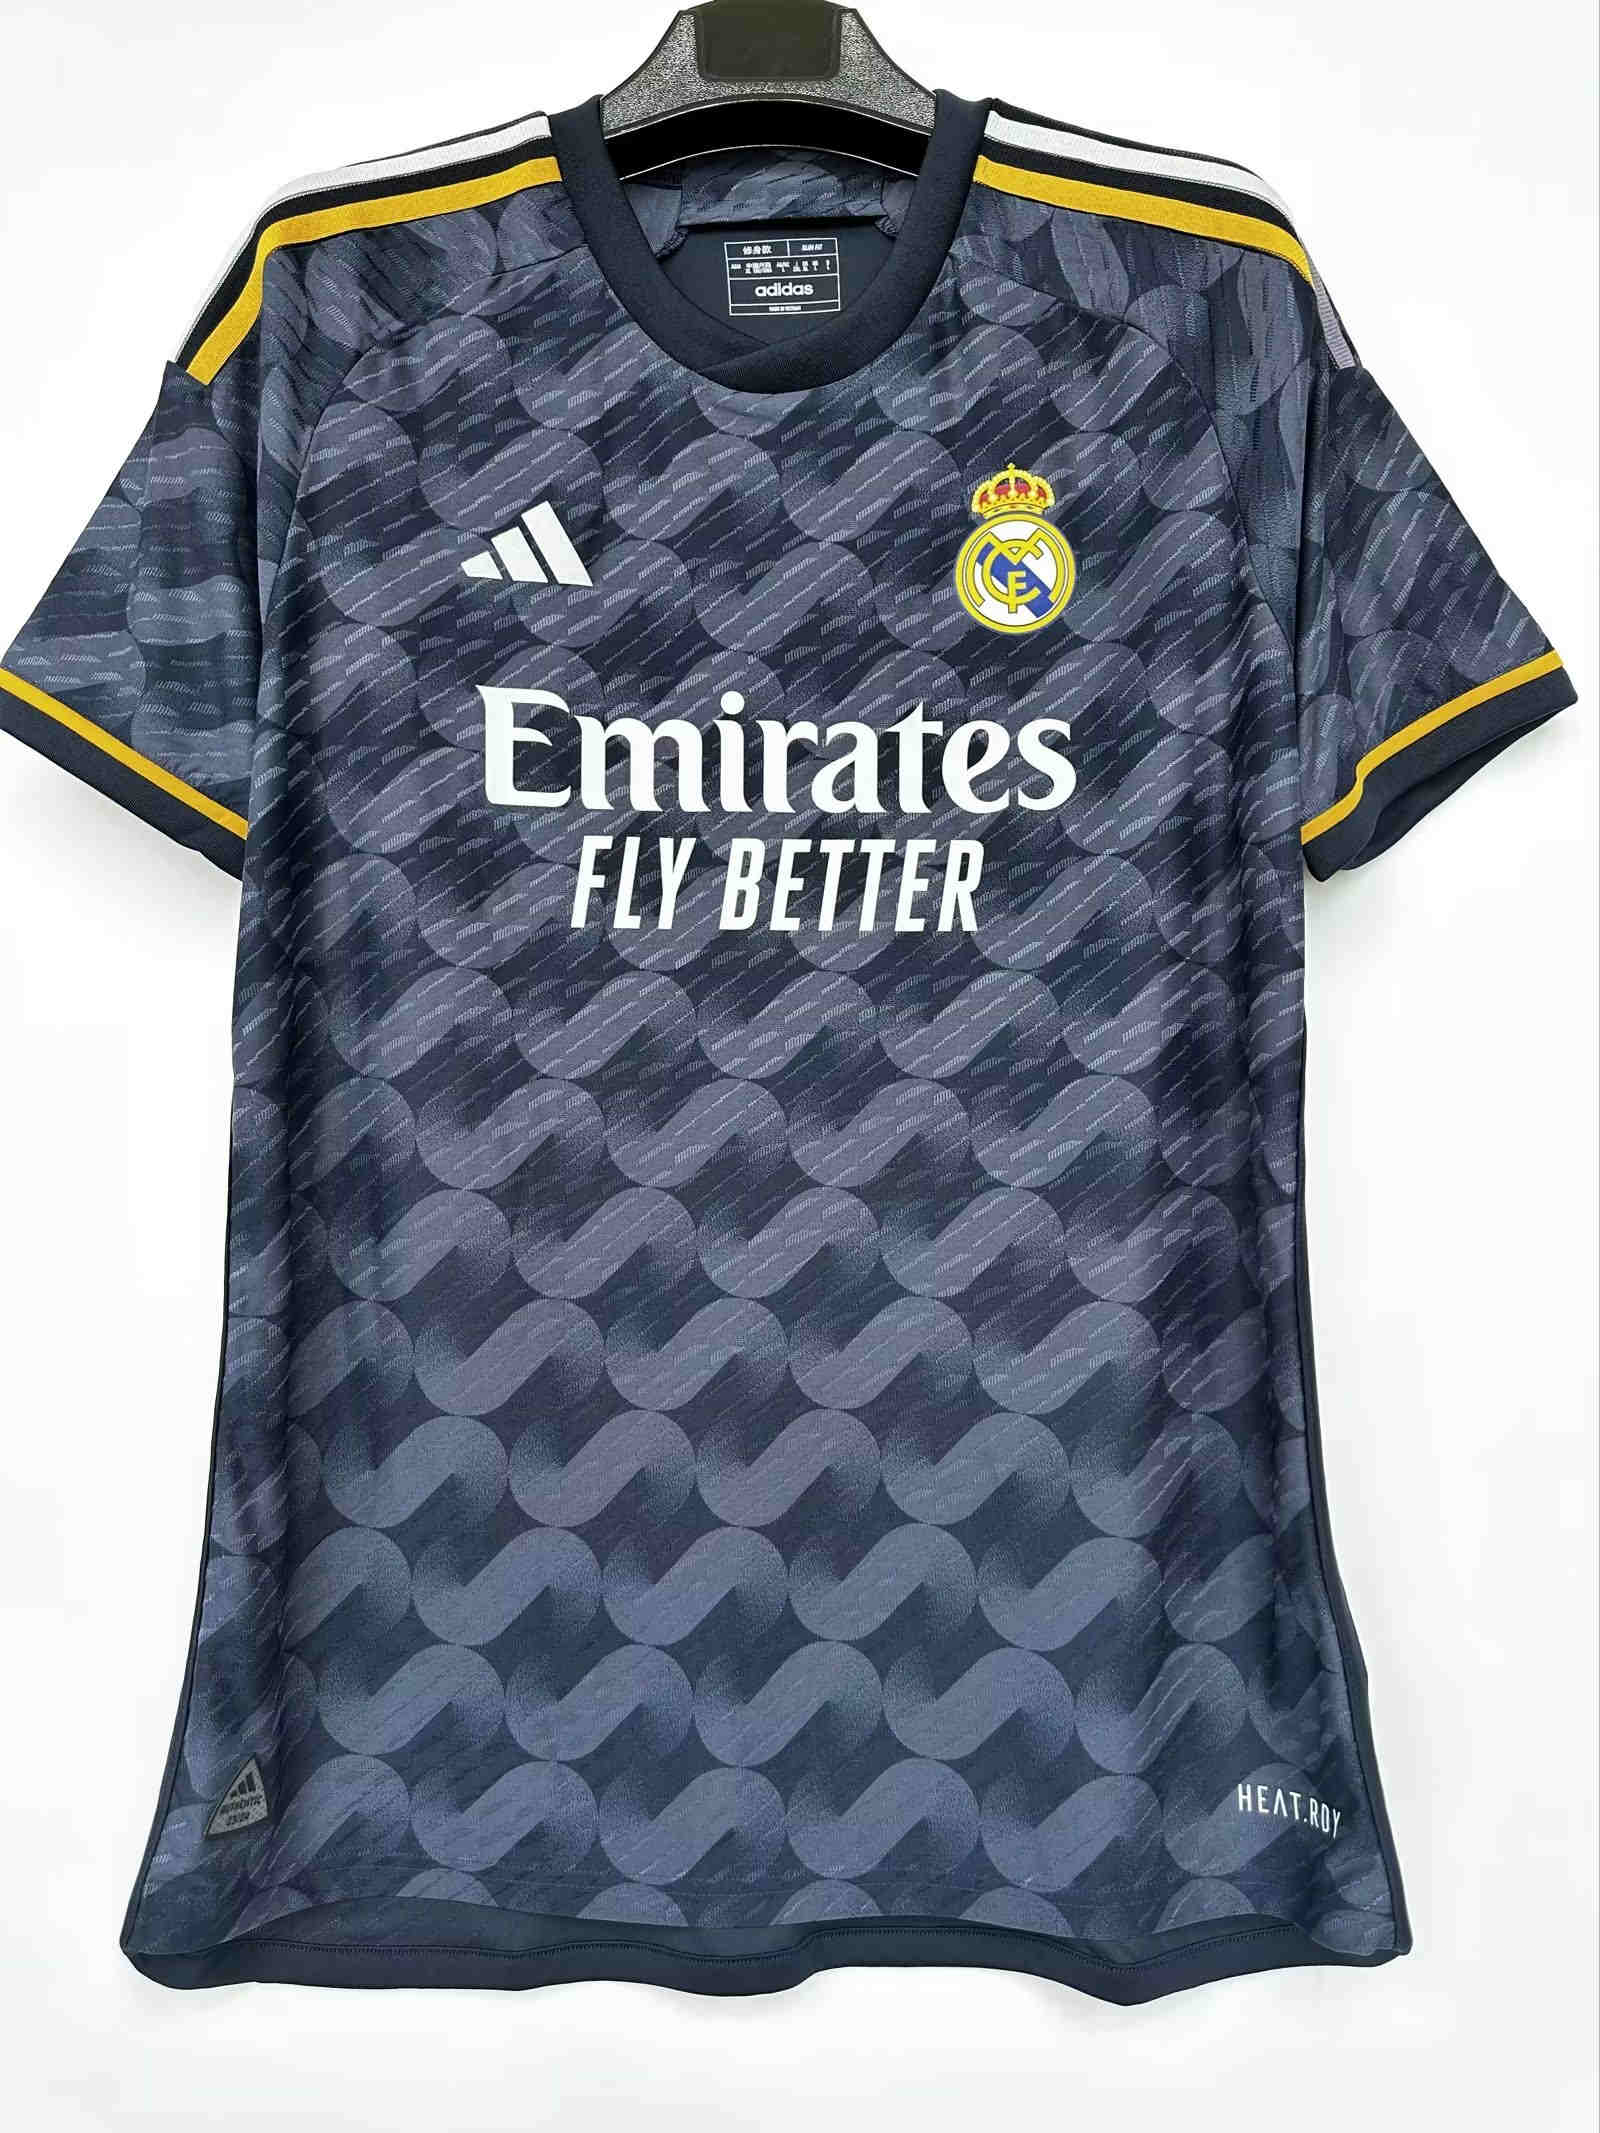 2023/2024 REAL MADRID away Player version tight fitting